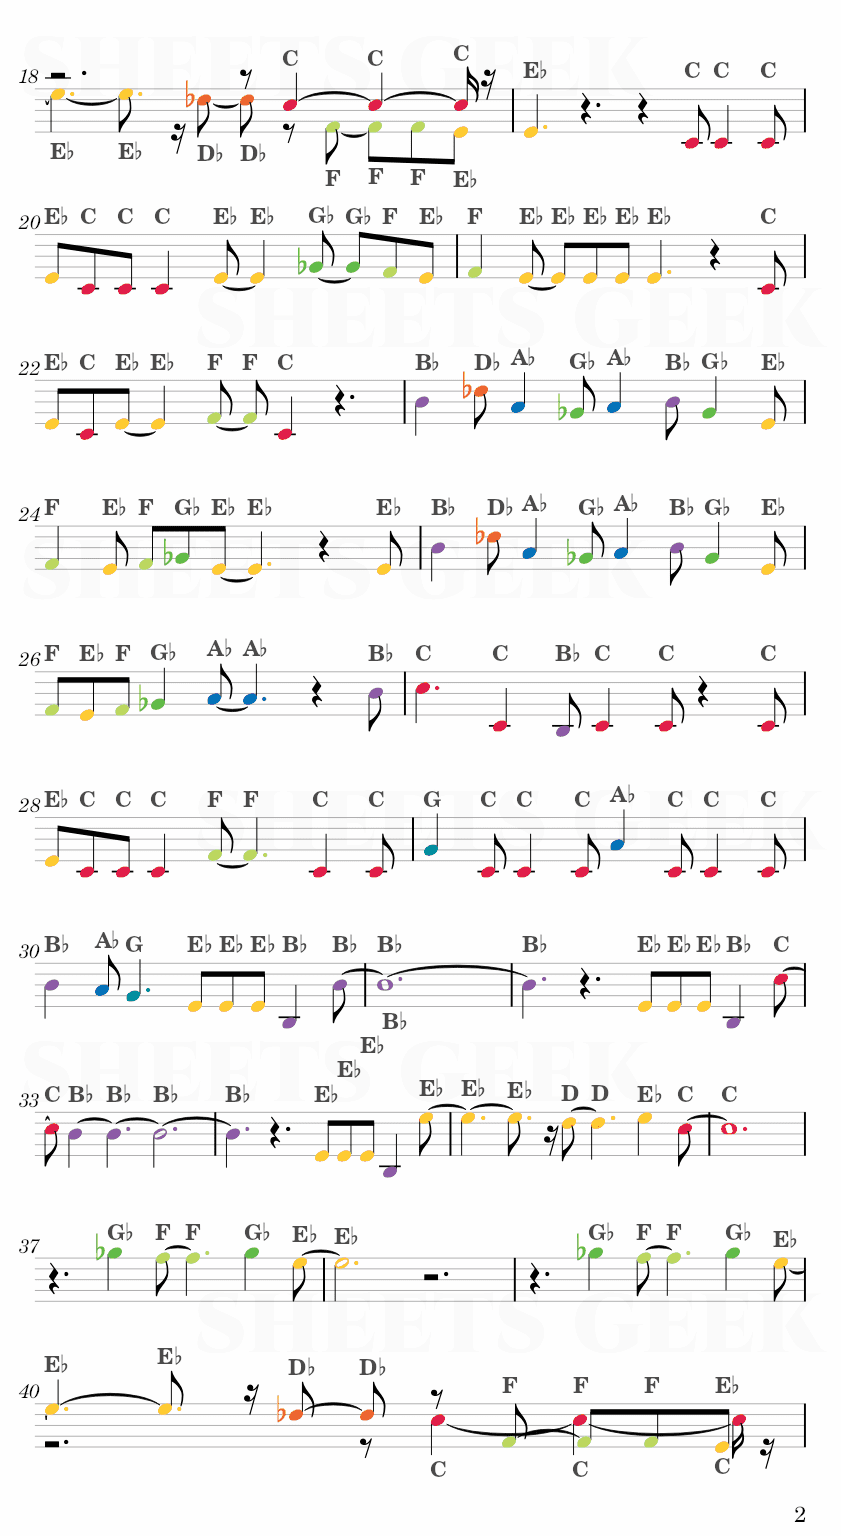 Into The Unknown - Idina Menzel and AURORA from Disney's Frozen 2 Easy Sheet Music Free for piano, keyboard, flute, violin, sax, cello page 2